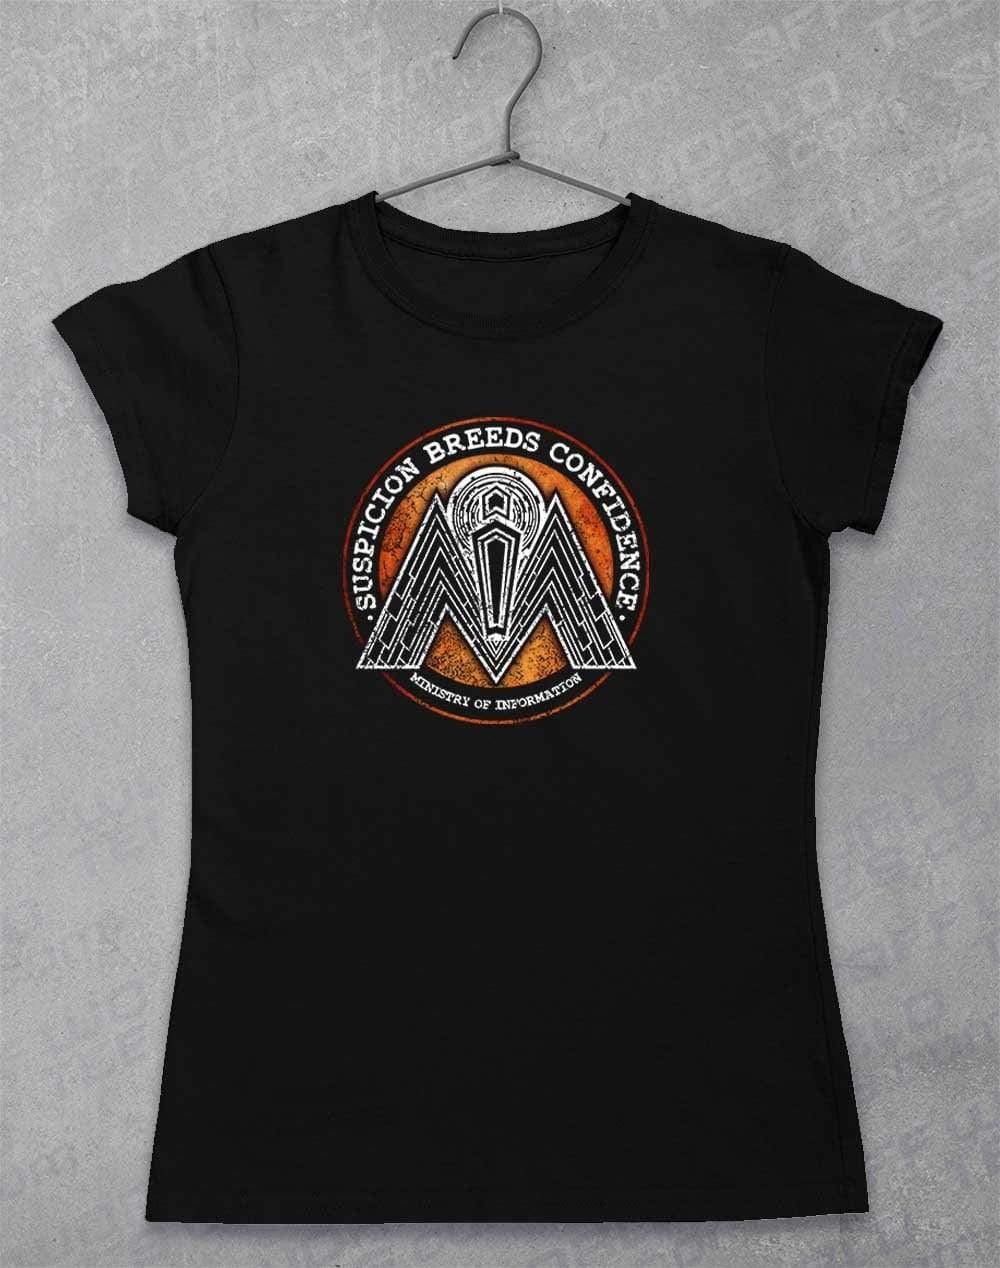 Ministry of Information Women's T-Shirt 8-10 / Black  - Off World Tees